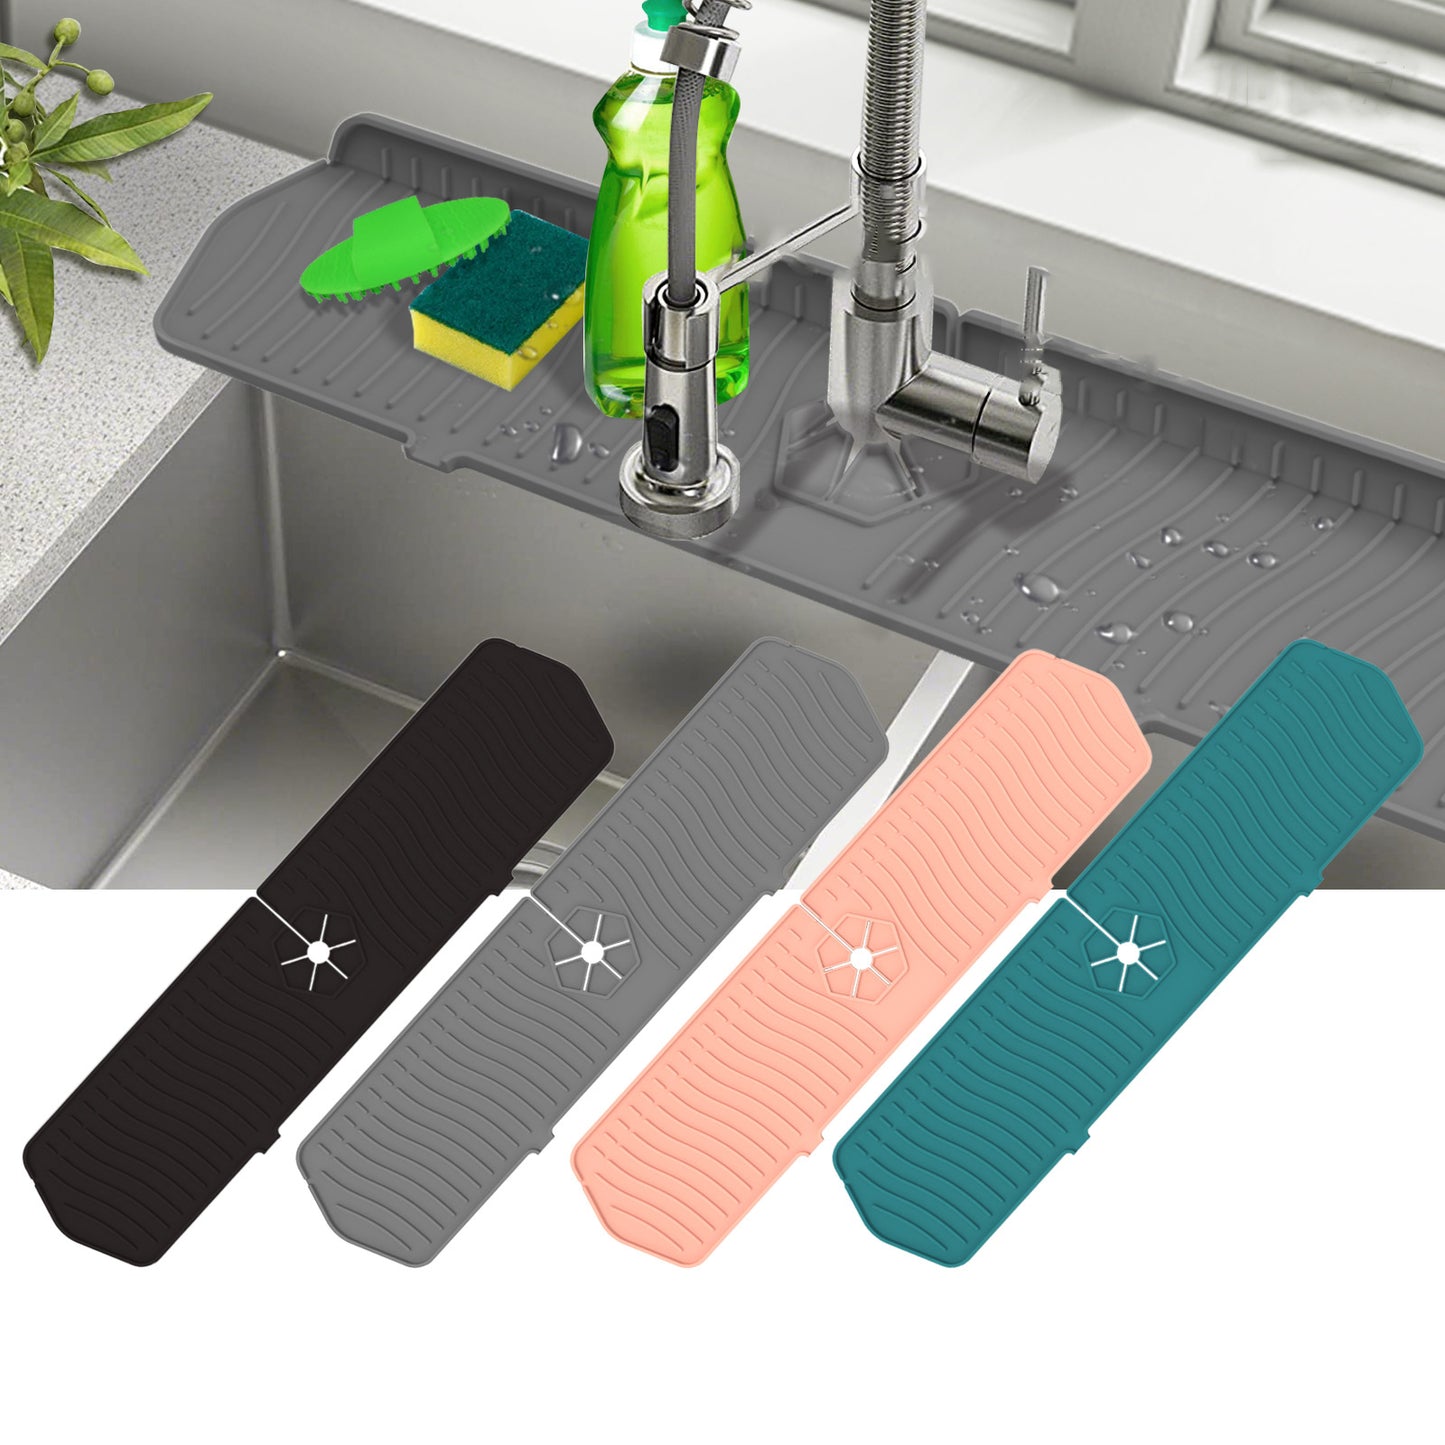 1pc Green Silicone Drain Mat For Family Kitchen Sink, Bathroom